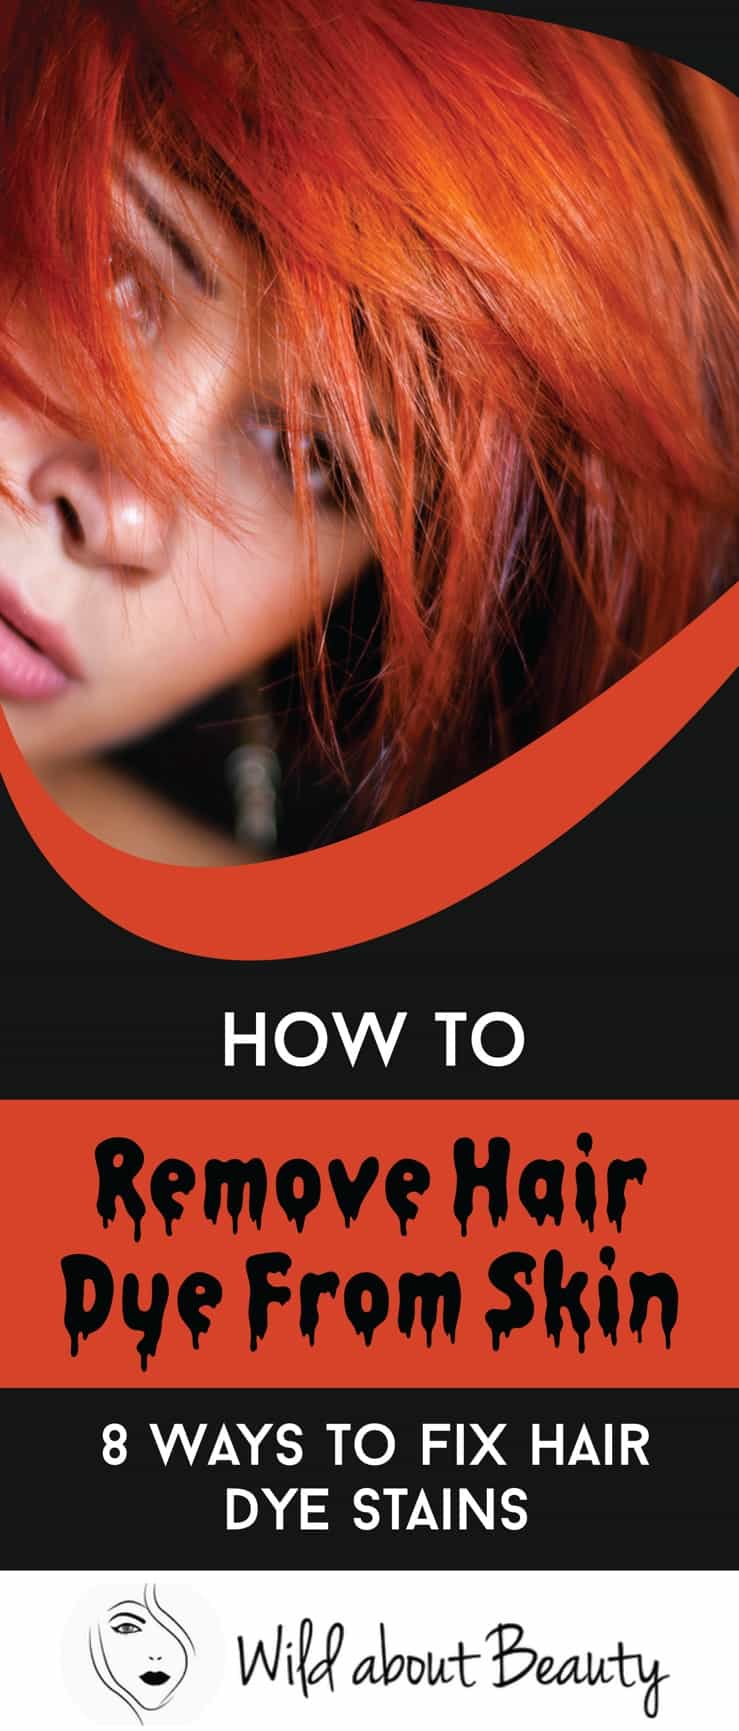 How To Remove Hair Dye From Skin